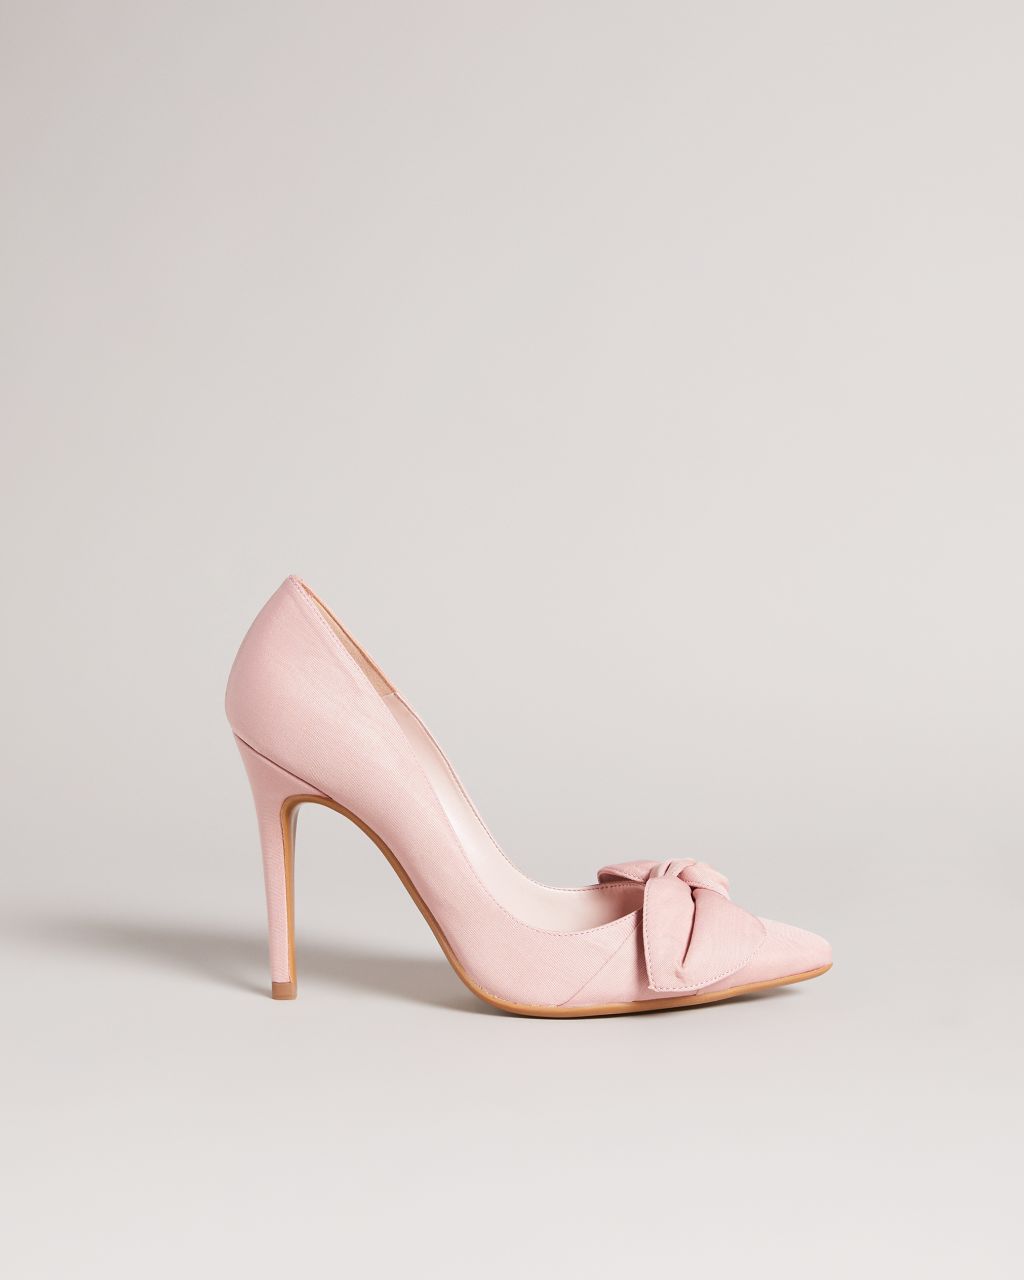 Ted Baker Women's Moire Satin Bow Court Shoes in Dusky Pink, Hyana